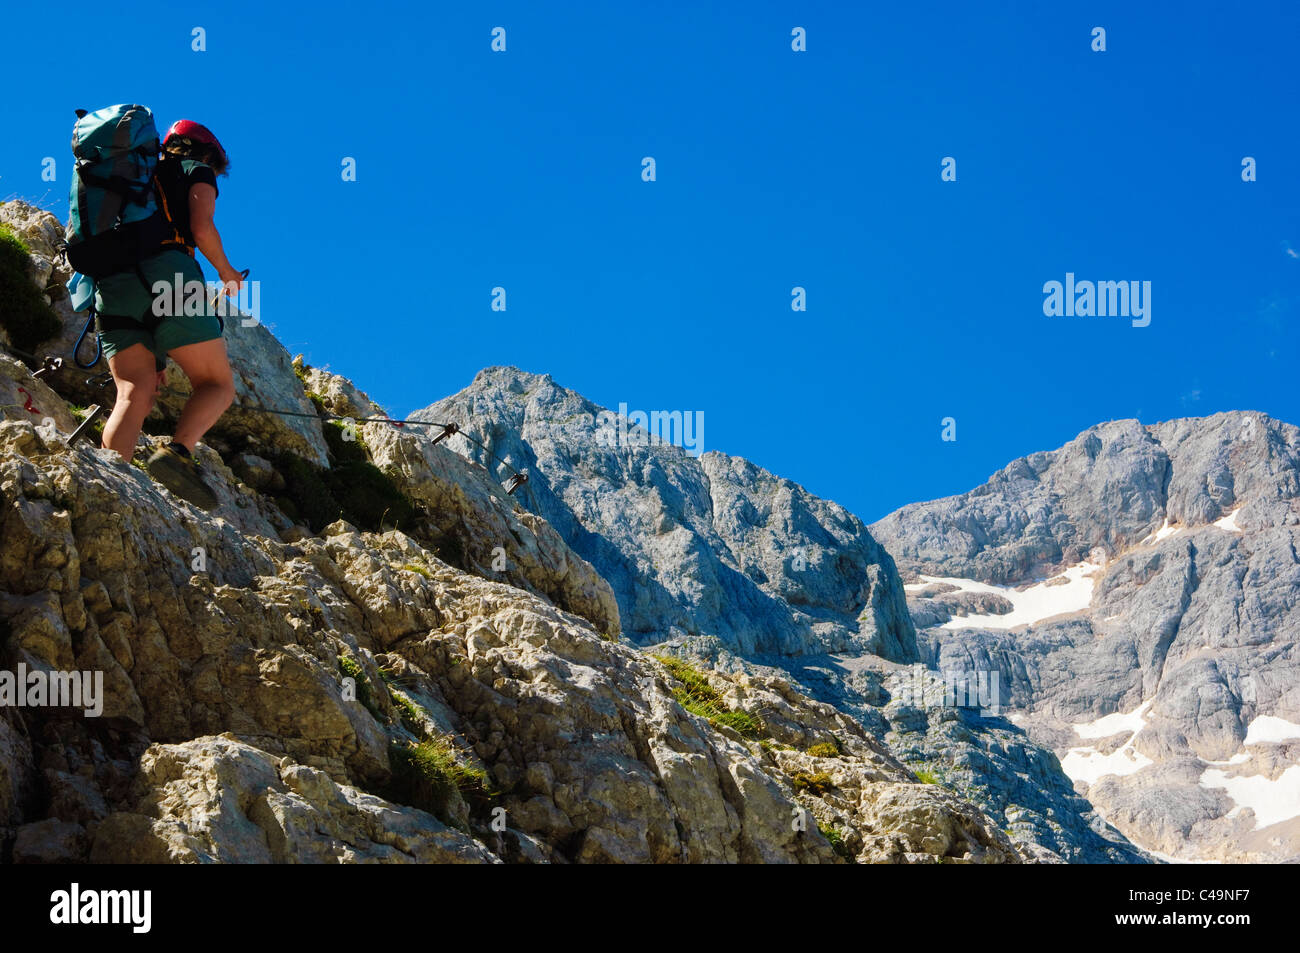 Climber on a via ferrata or protected path on the North Face of ...